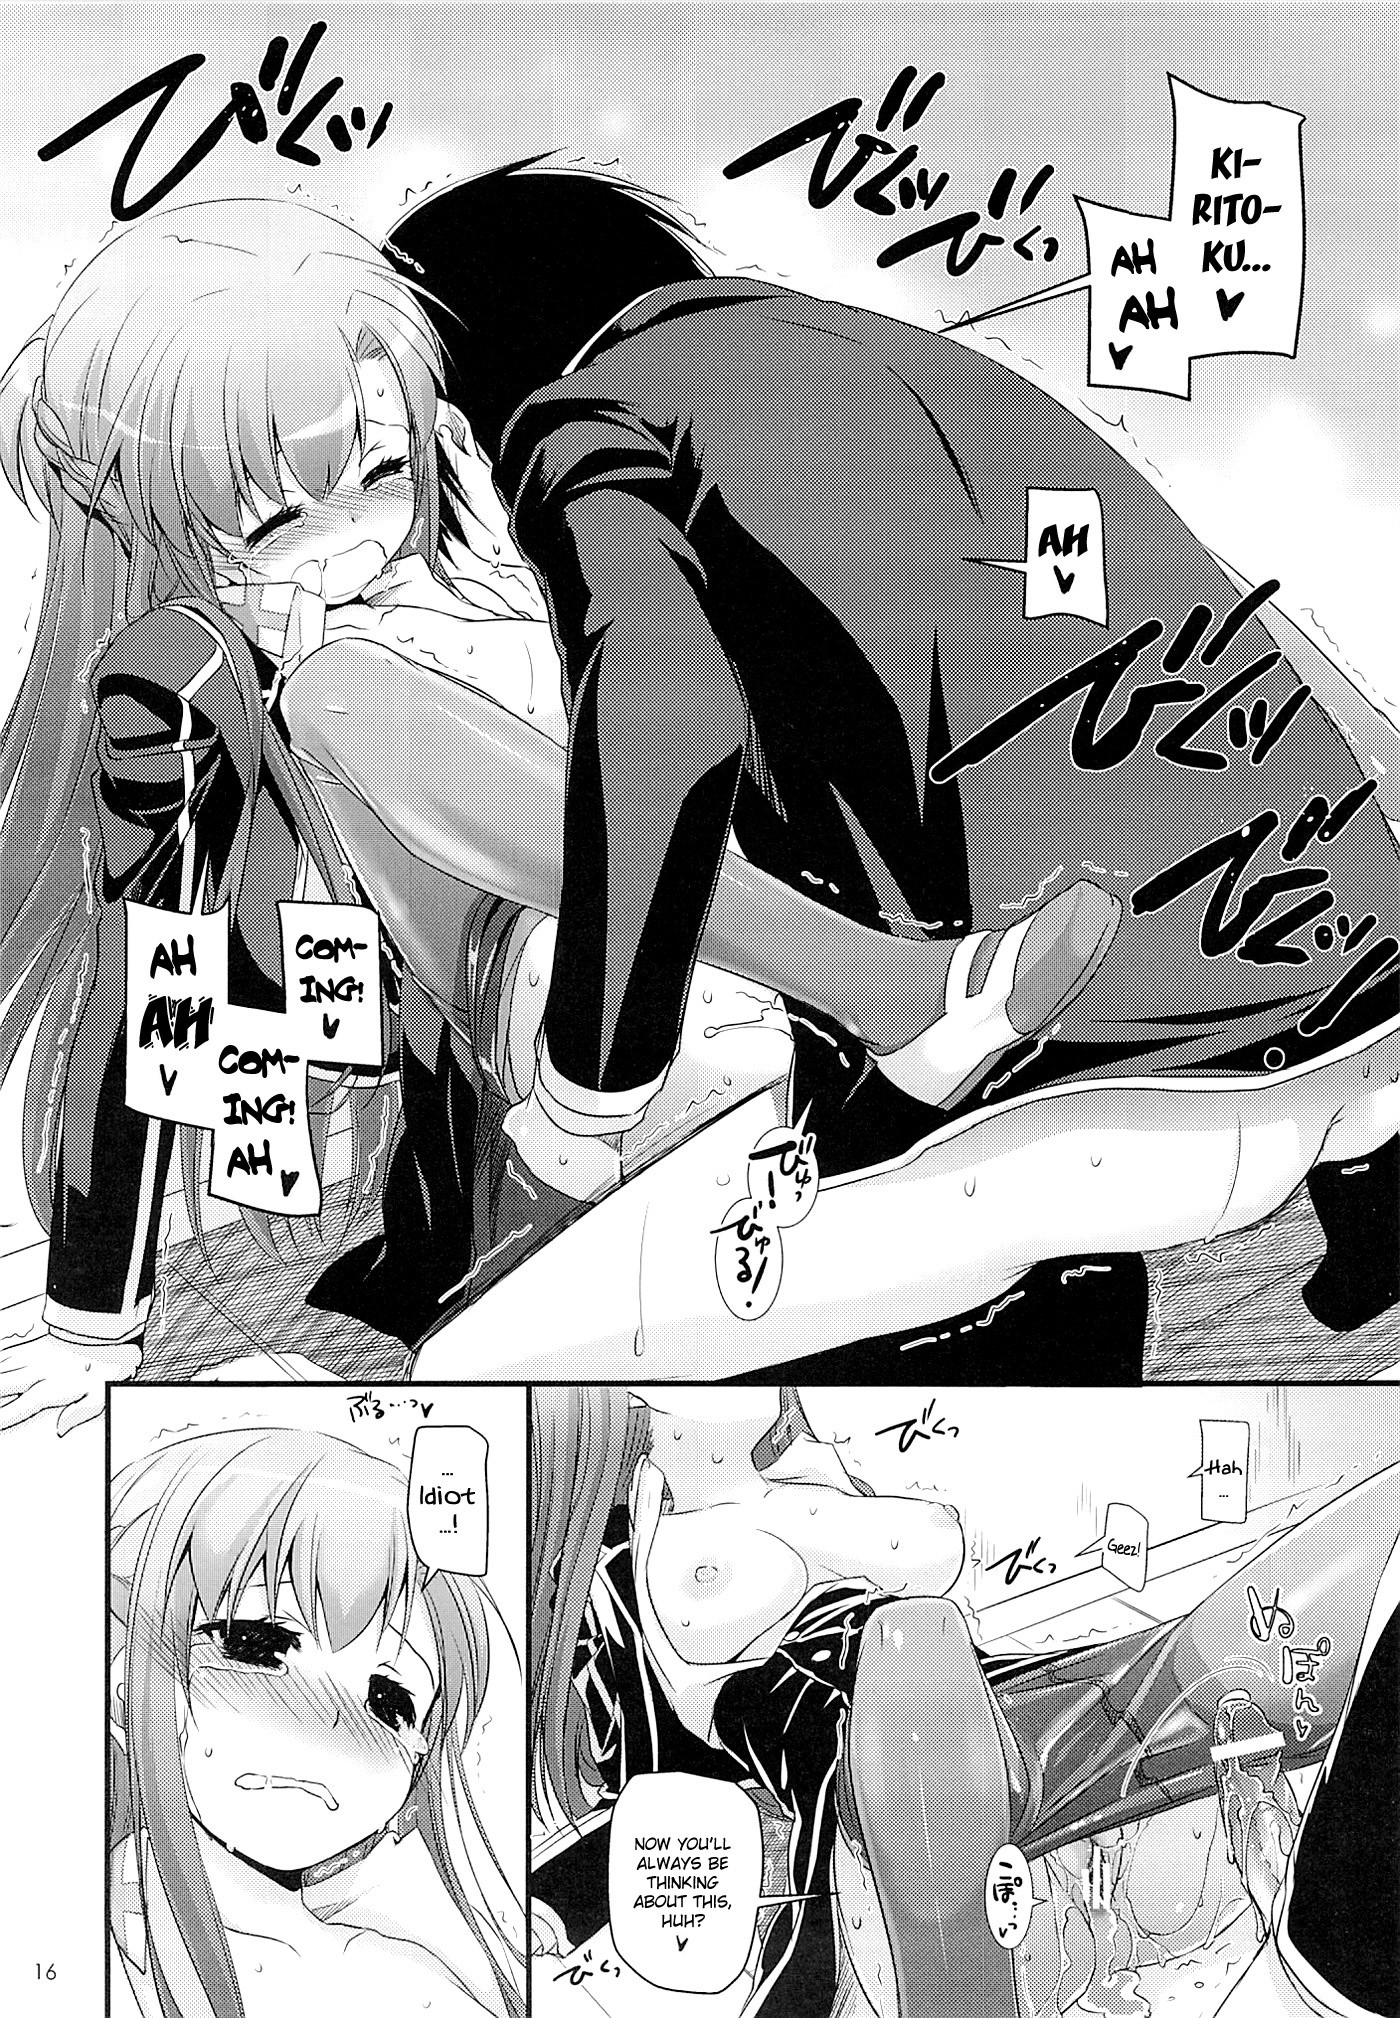 D.L. Action 74 hentai manga picture 15